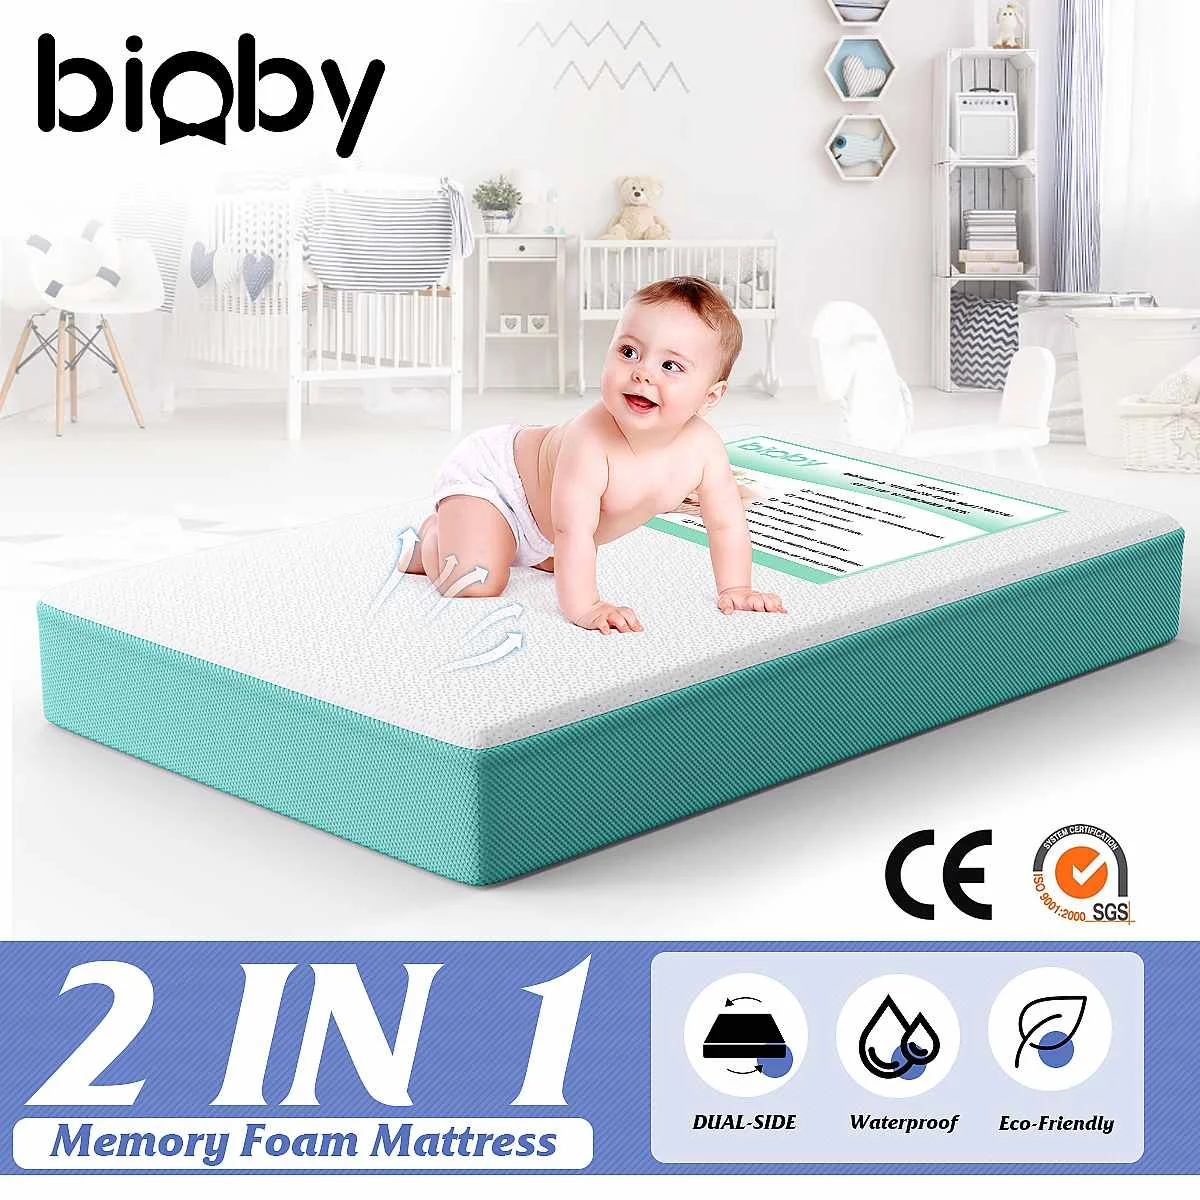 Bioby 2-Stage Baby Memory Foam Crib Mattresses Infant Toddler Cot Mattress with Waterproof Lining & Removable Mattress Cover